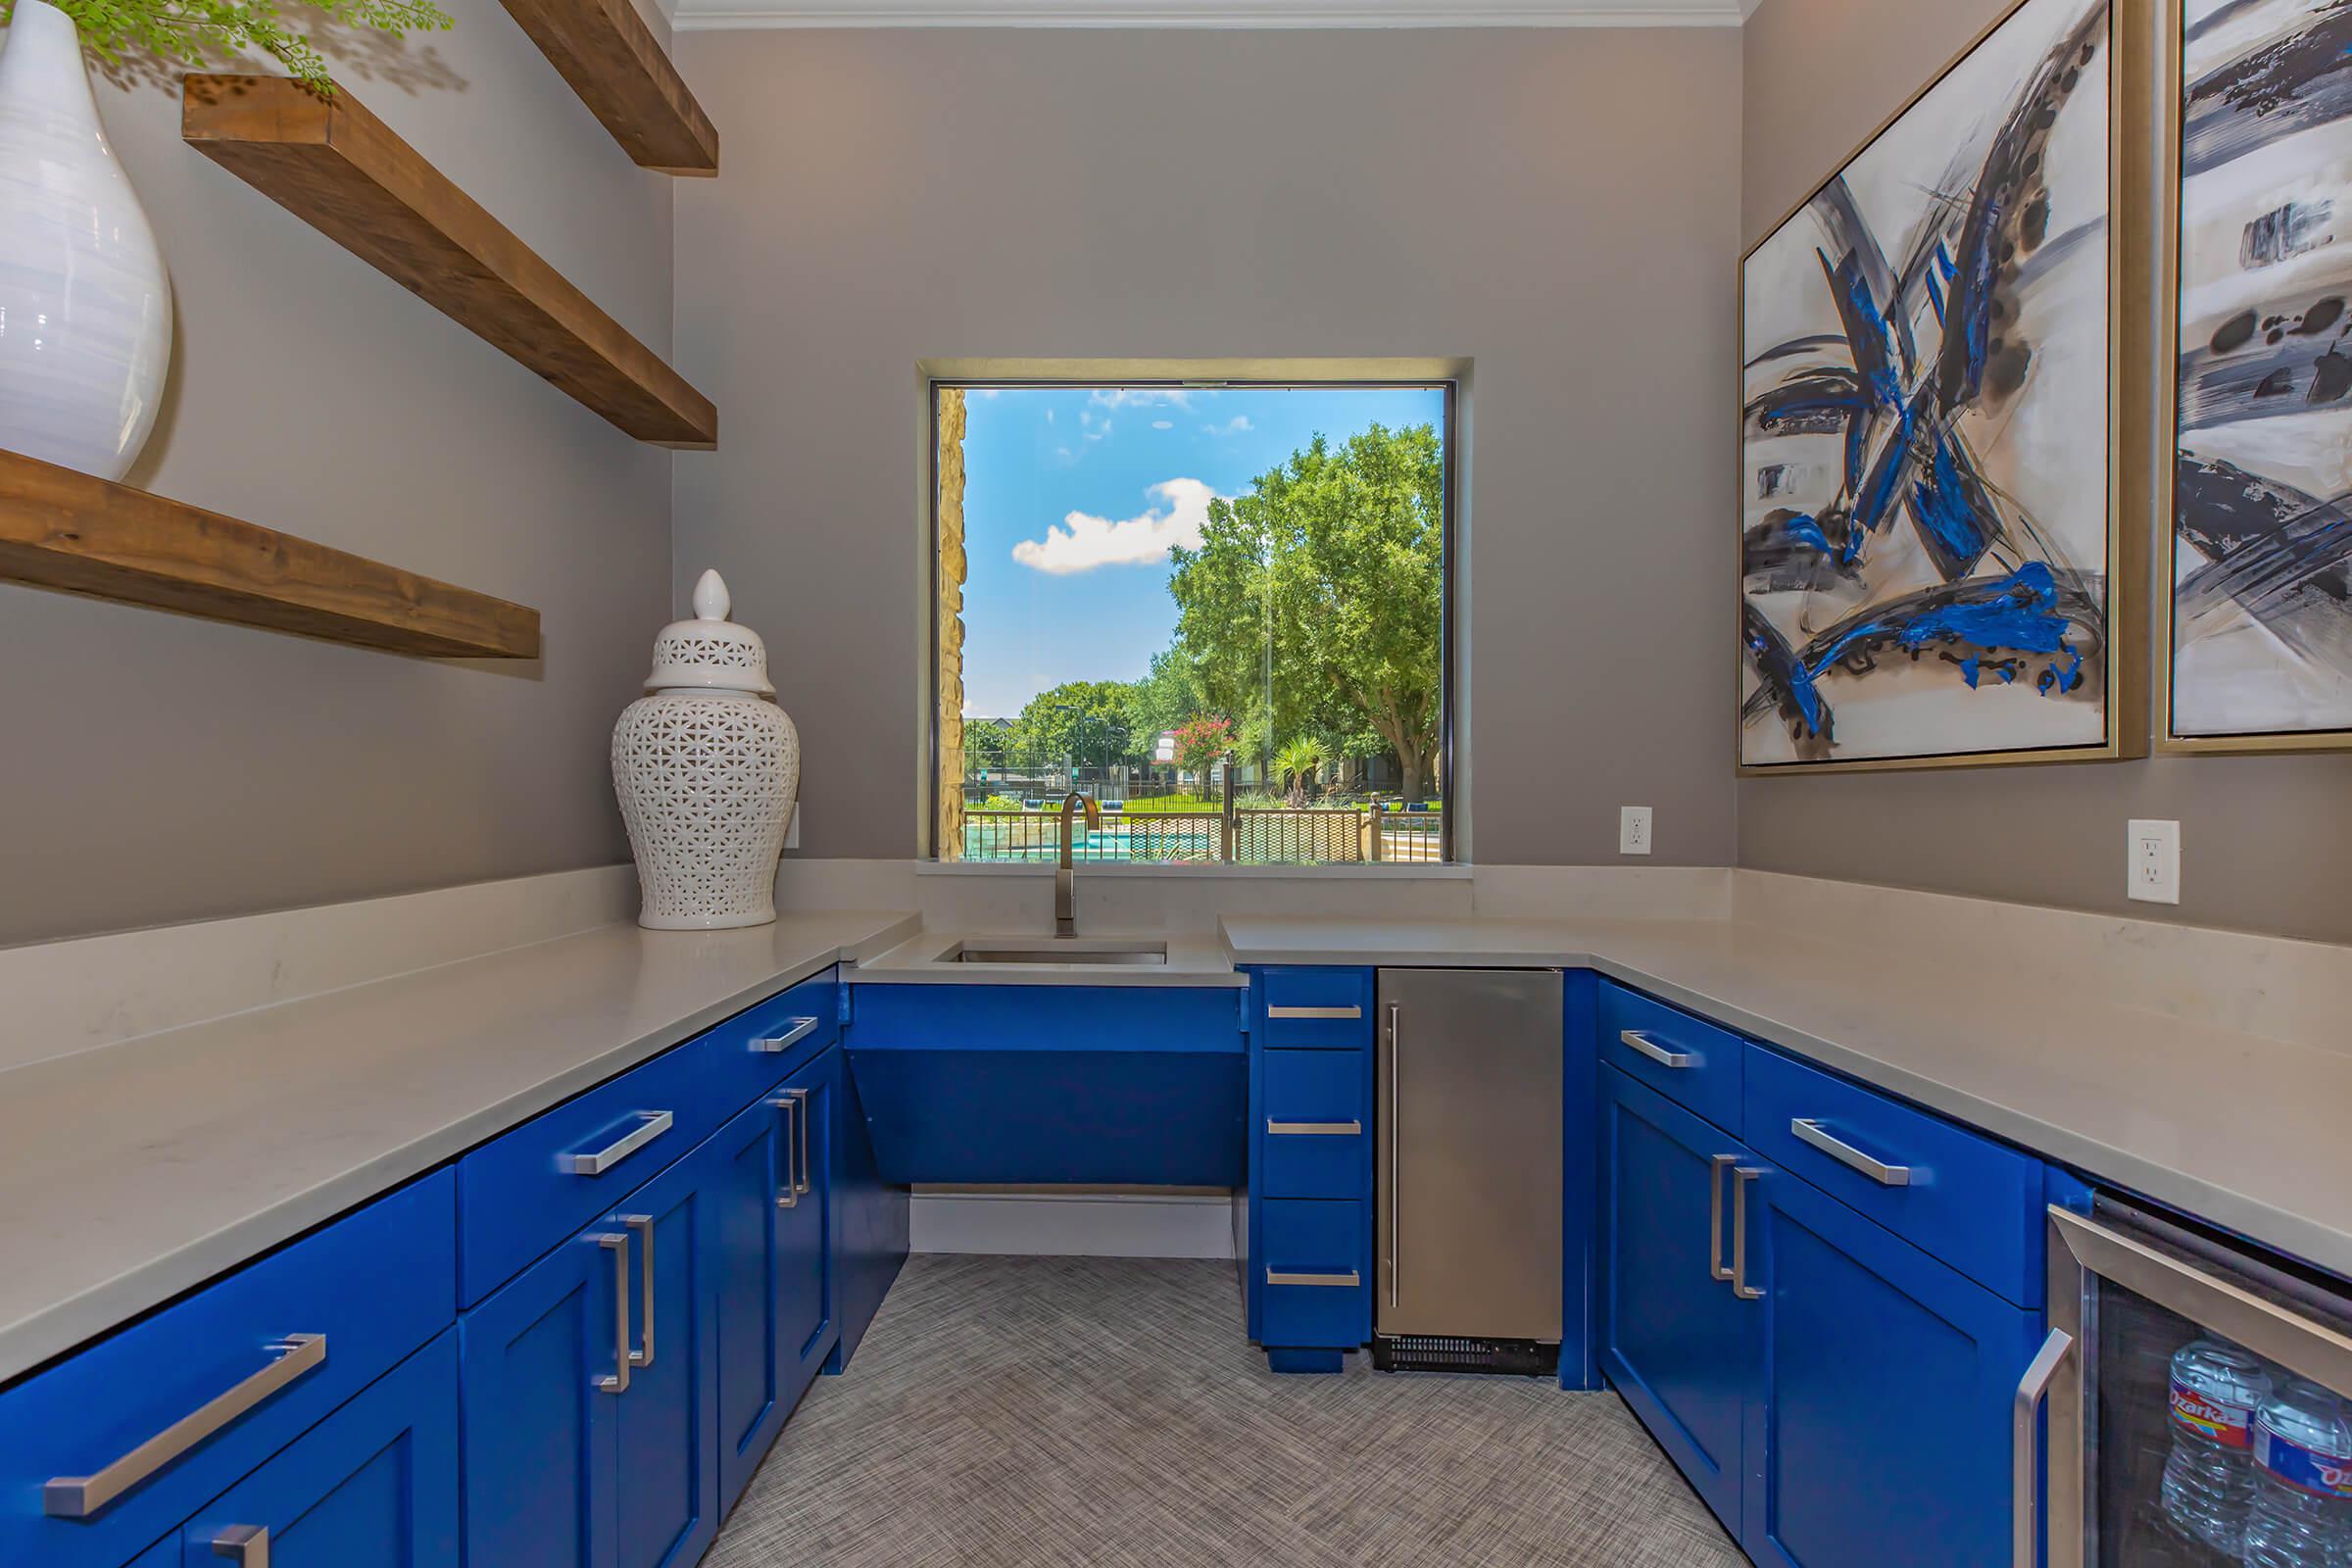 community kitchen with blue cabinets